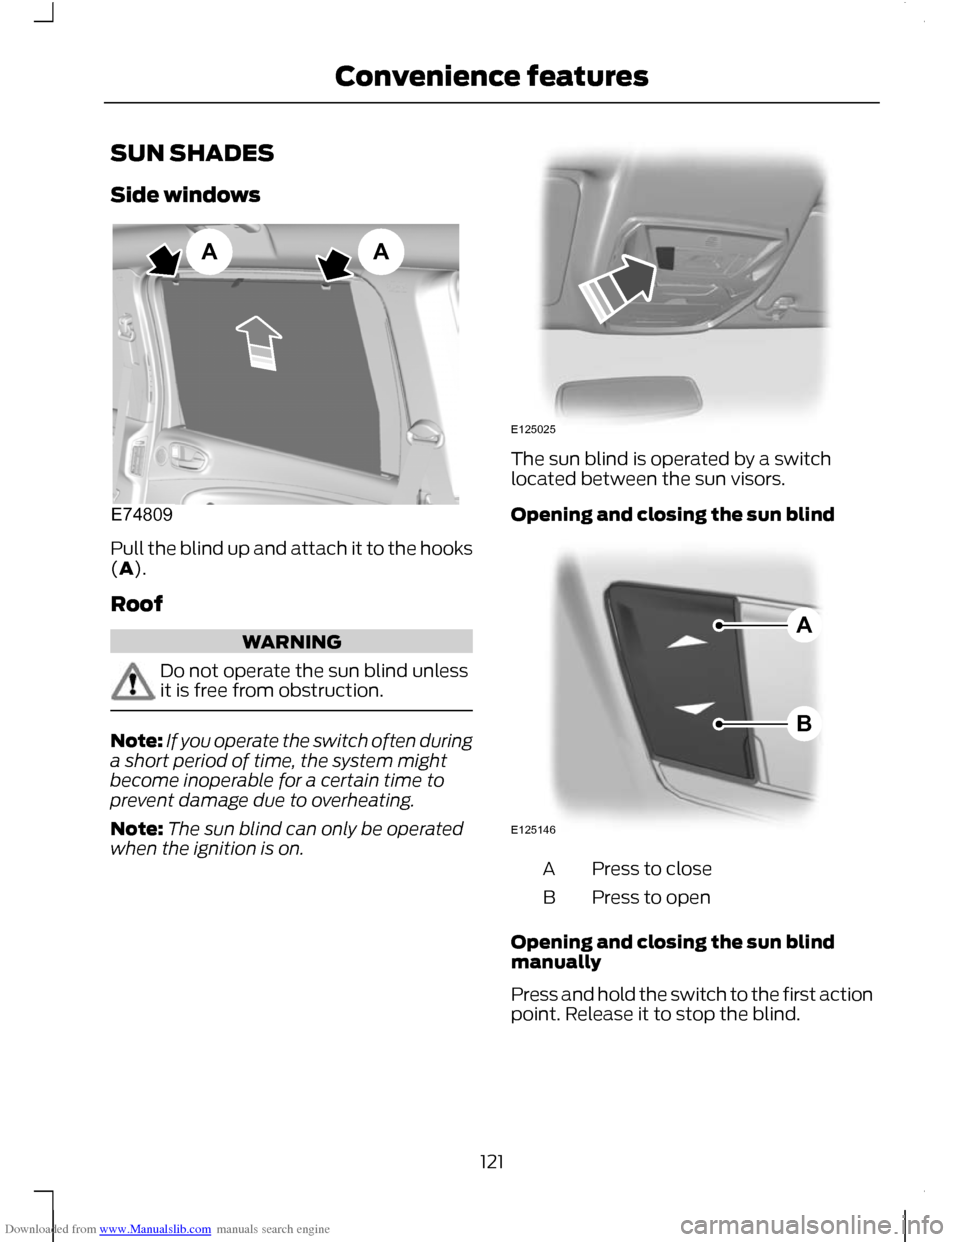 FORD C MAX 2011 2.G Owners Manual Downloaded from www.Manualslib.com manuals search engine SUN SHADES
Side windows
Pull the blind up and attach it to the hooks
(A).
Roof
WARNING
Do not operate the sun blind unless
it is free from obst